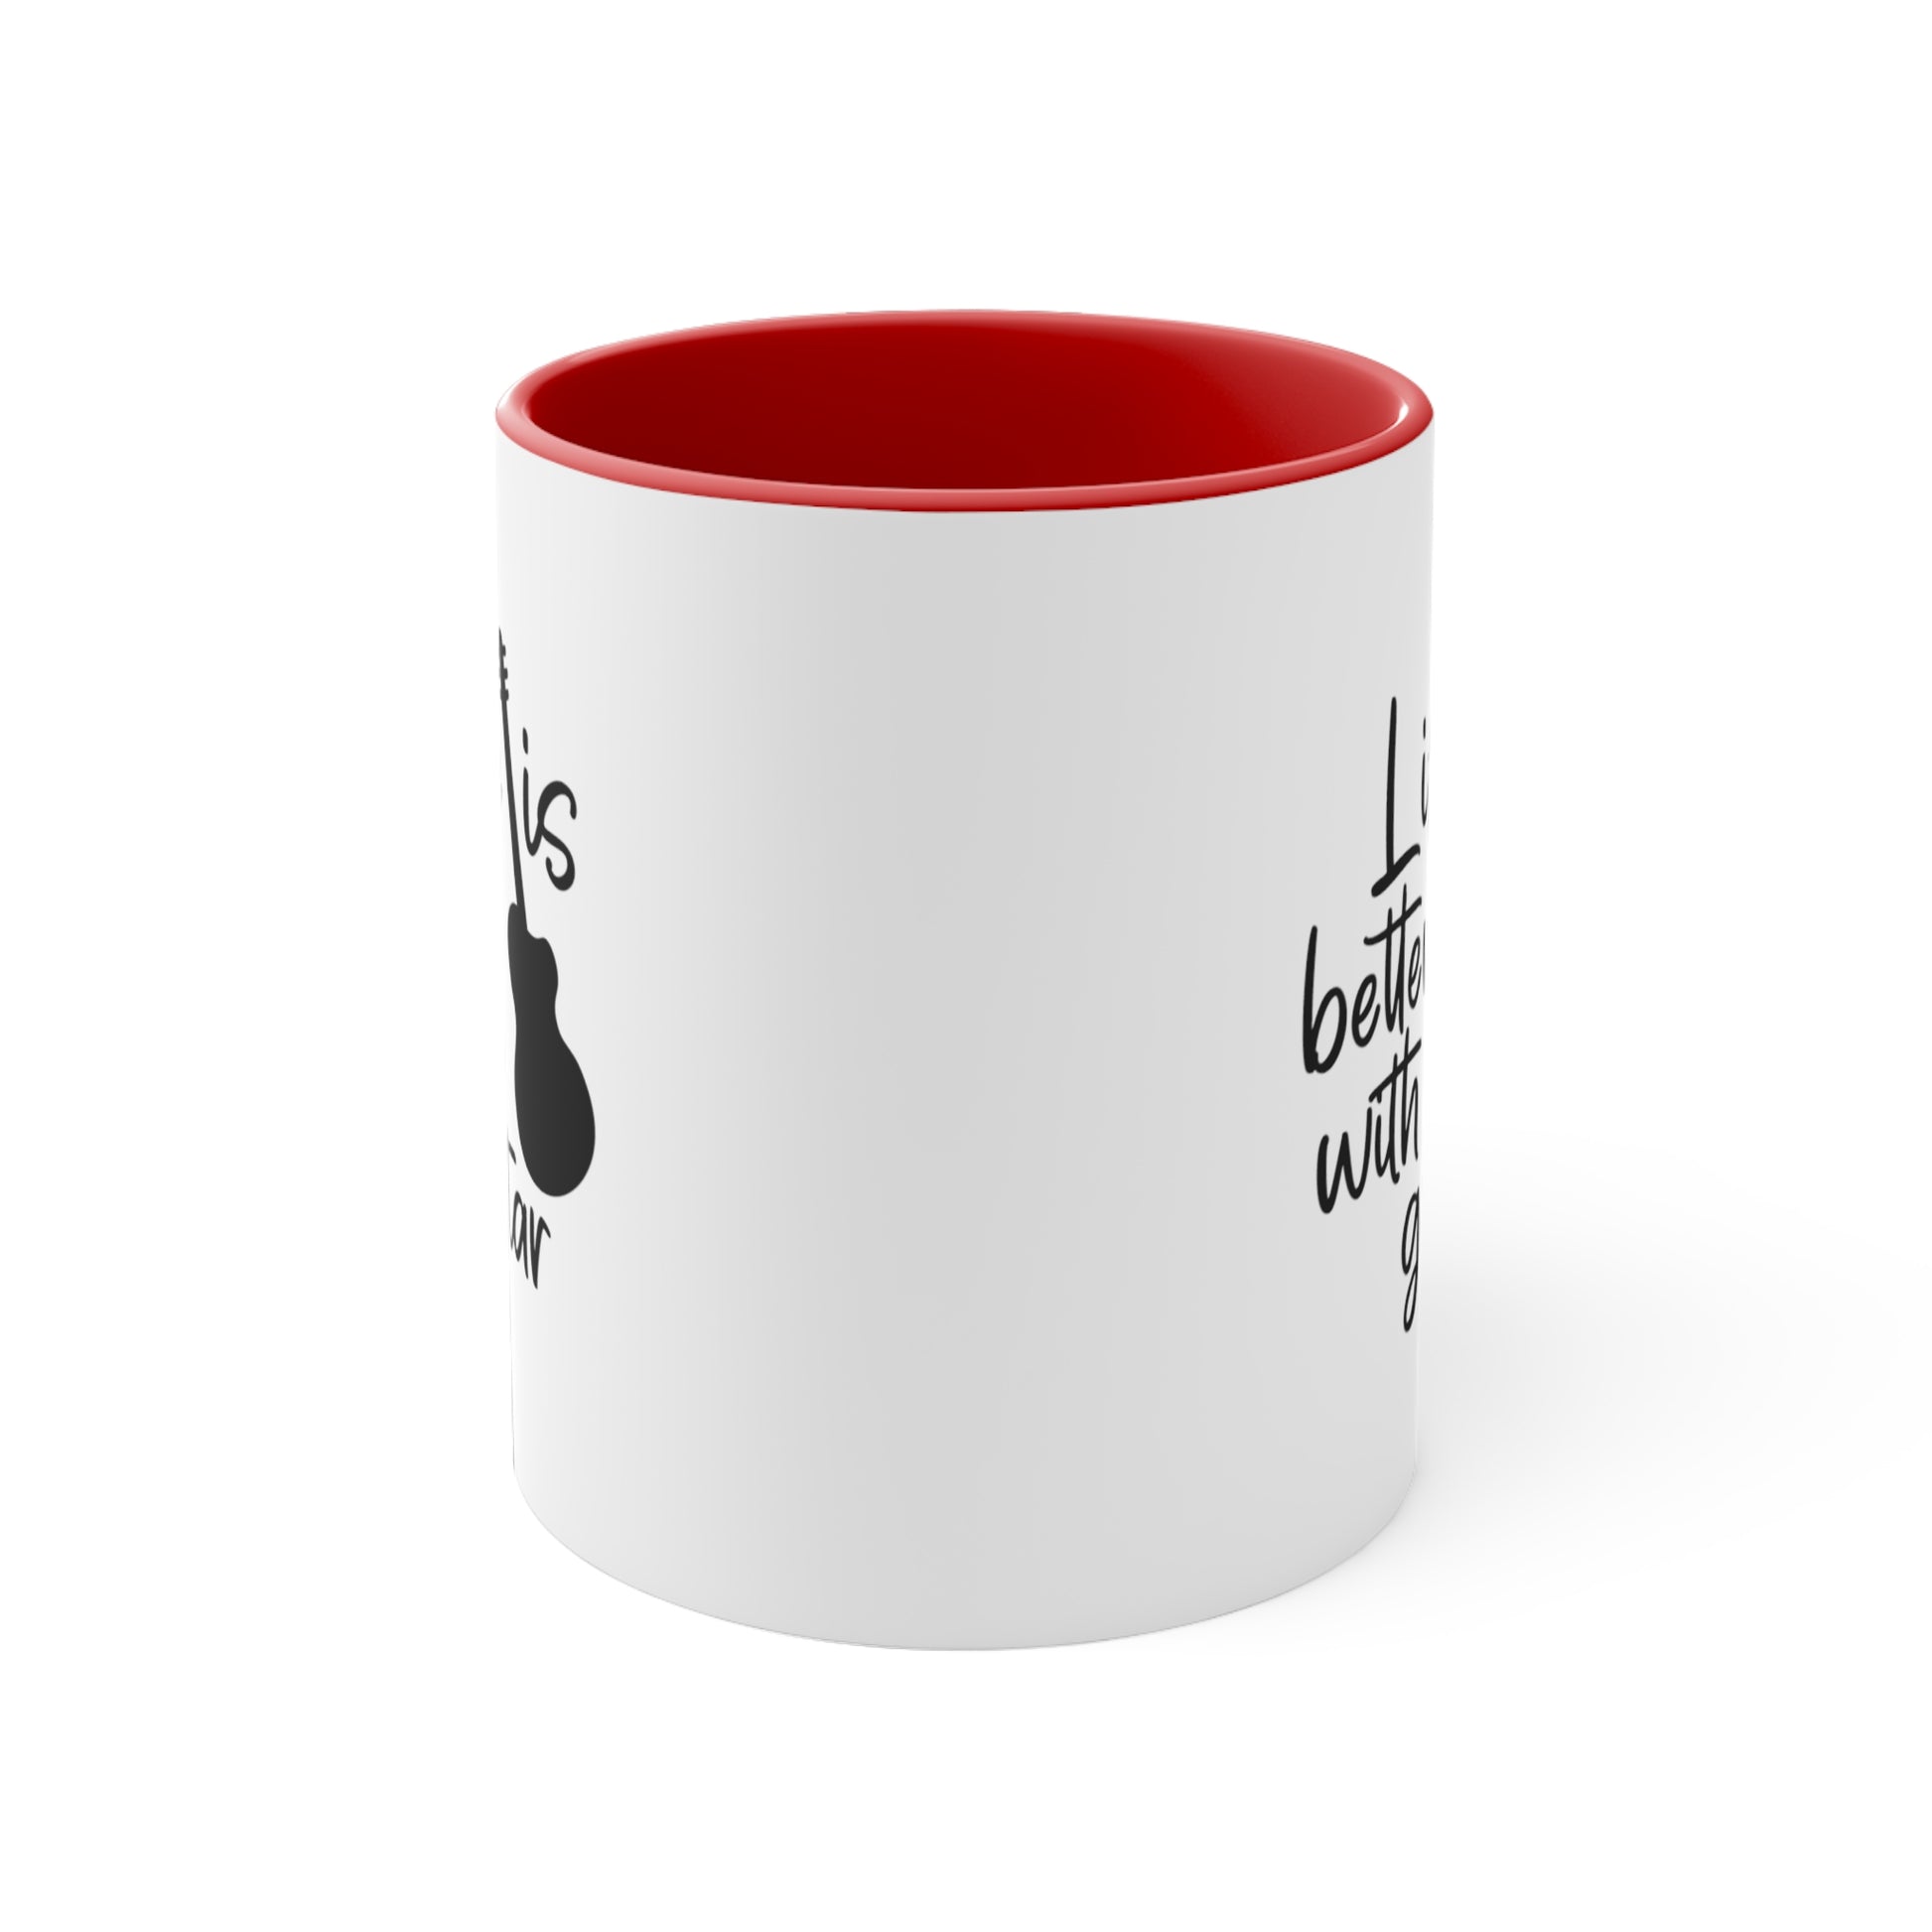 Music Lovers Mugs: Life if Better with a Guitar